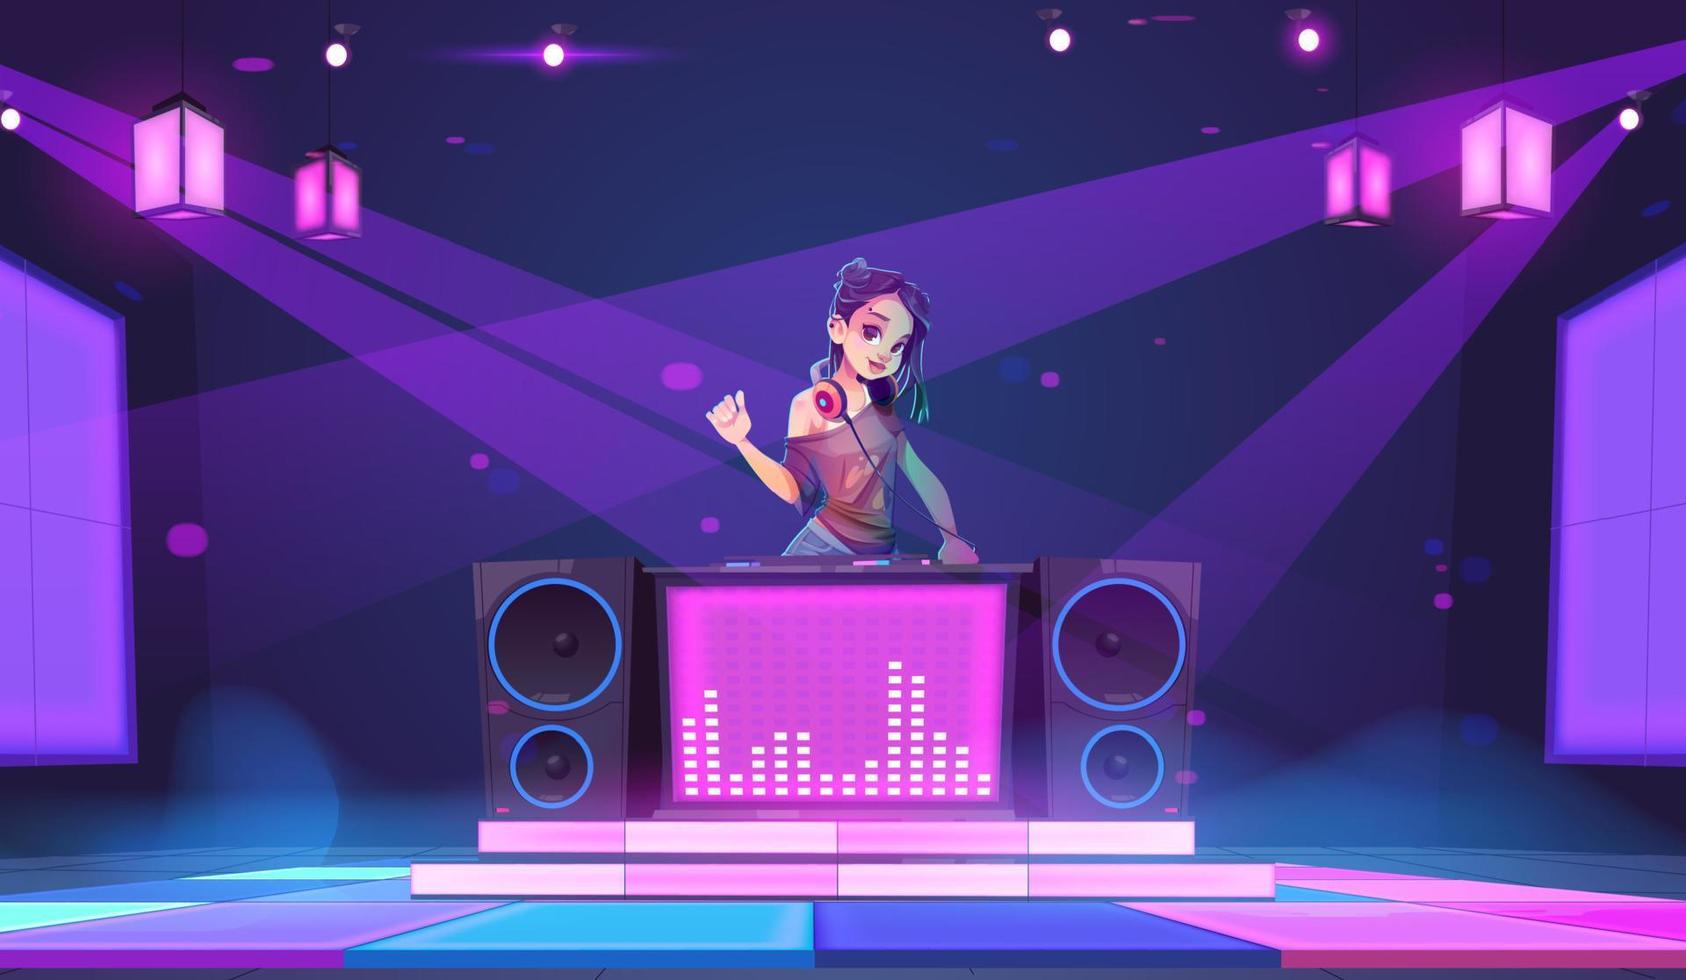 Dj girl stand at turntable in night club, party vector